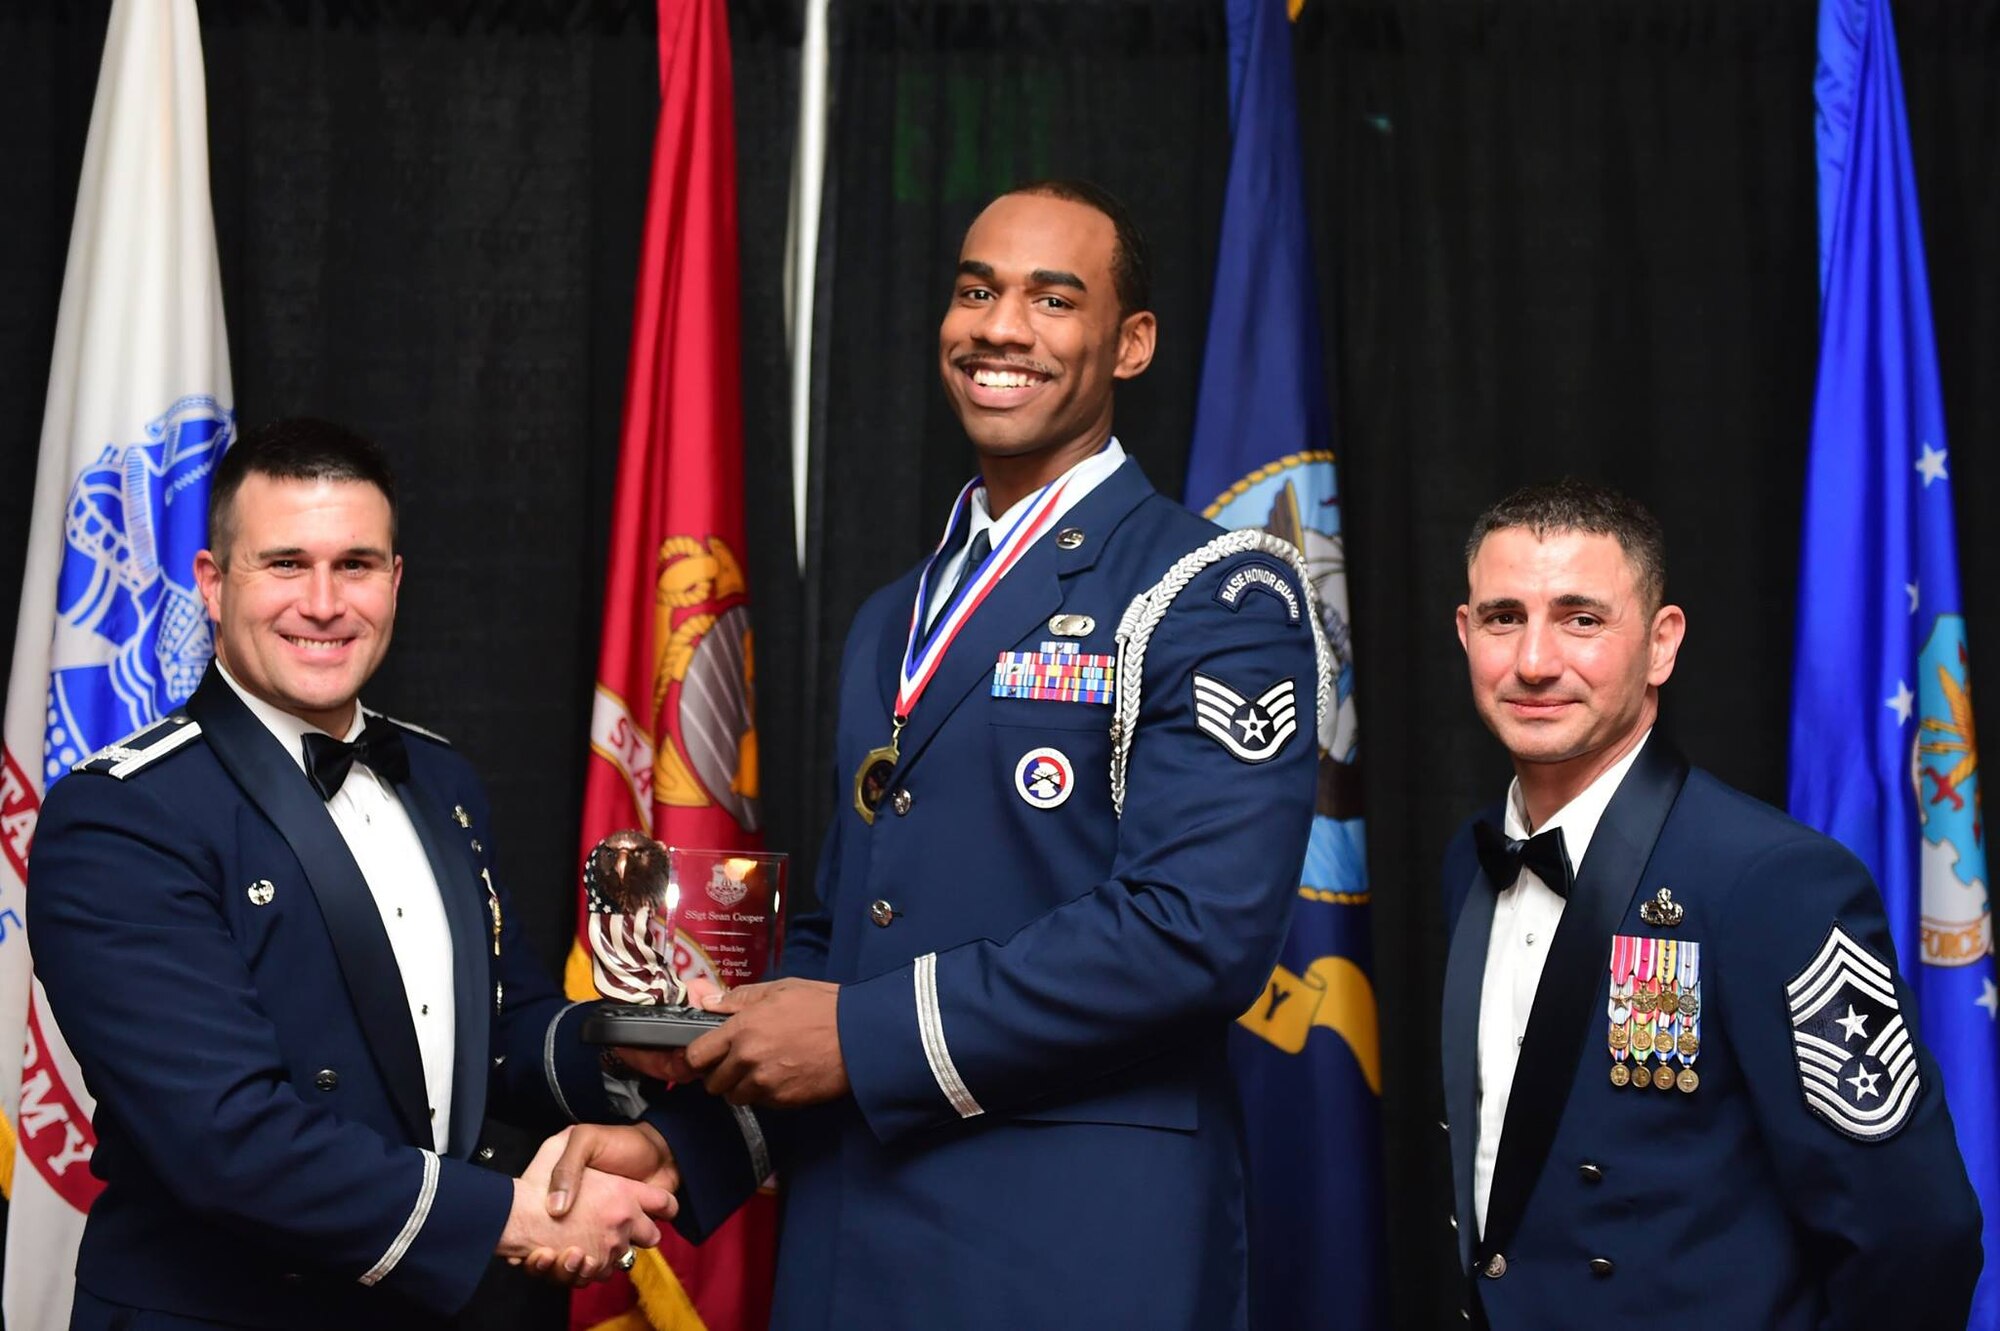 Staff Sgt. Sean Cooper, ARPC retirements service team technician, was recognized as Team Buckley Honor Guard of the Year for 2014 during a ceremony Feb. 27 at the Summit Event Center, Aurora, Colorado. (U.S. Air Force photo/Airman 1st Class Luke W. Nowakowski)